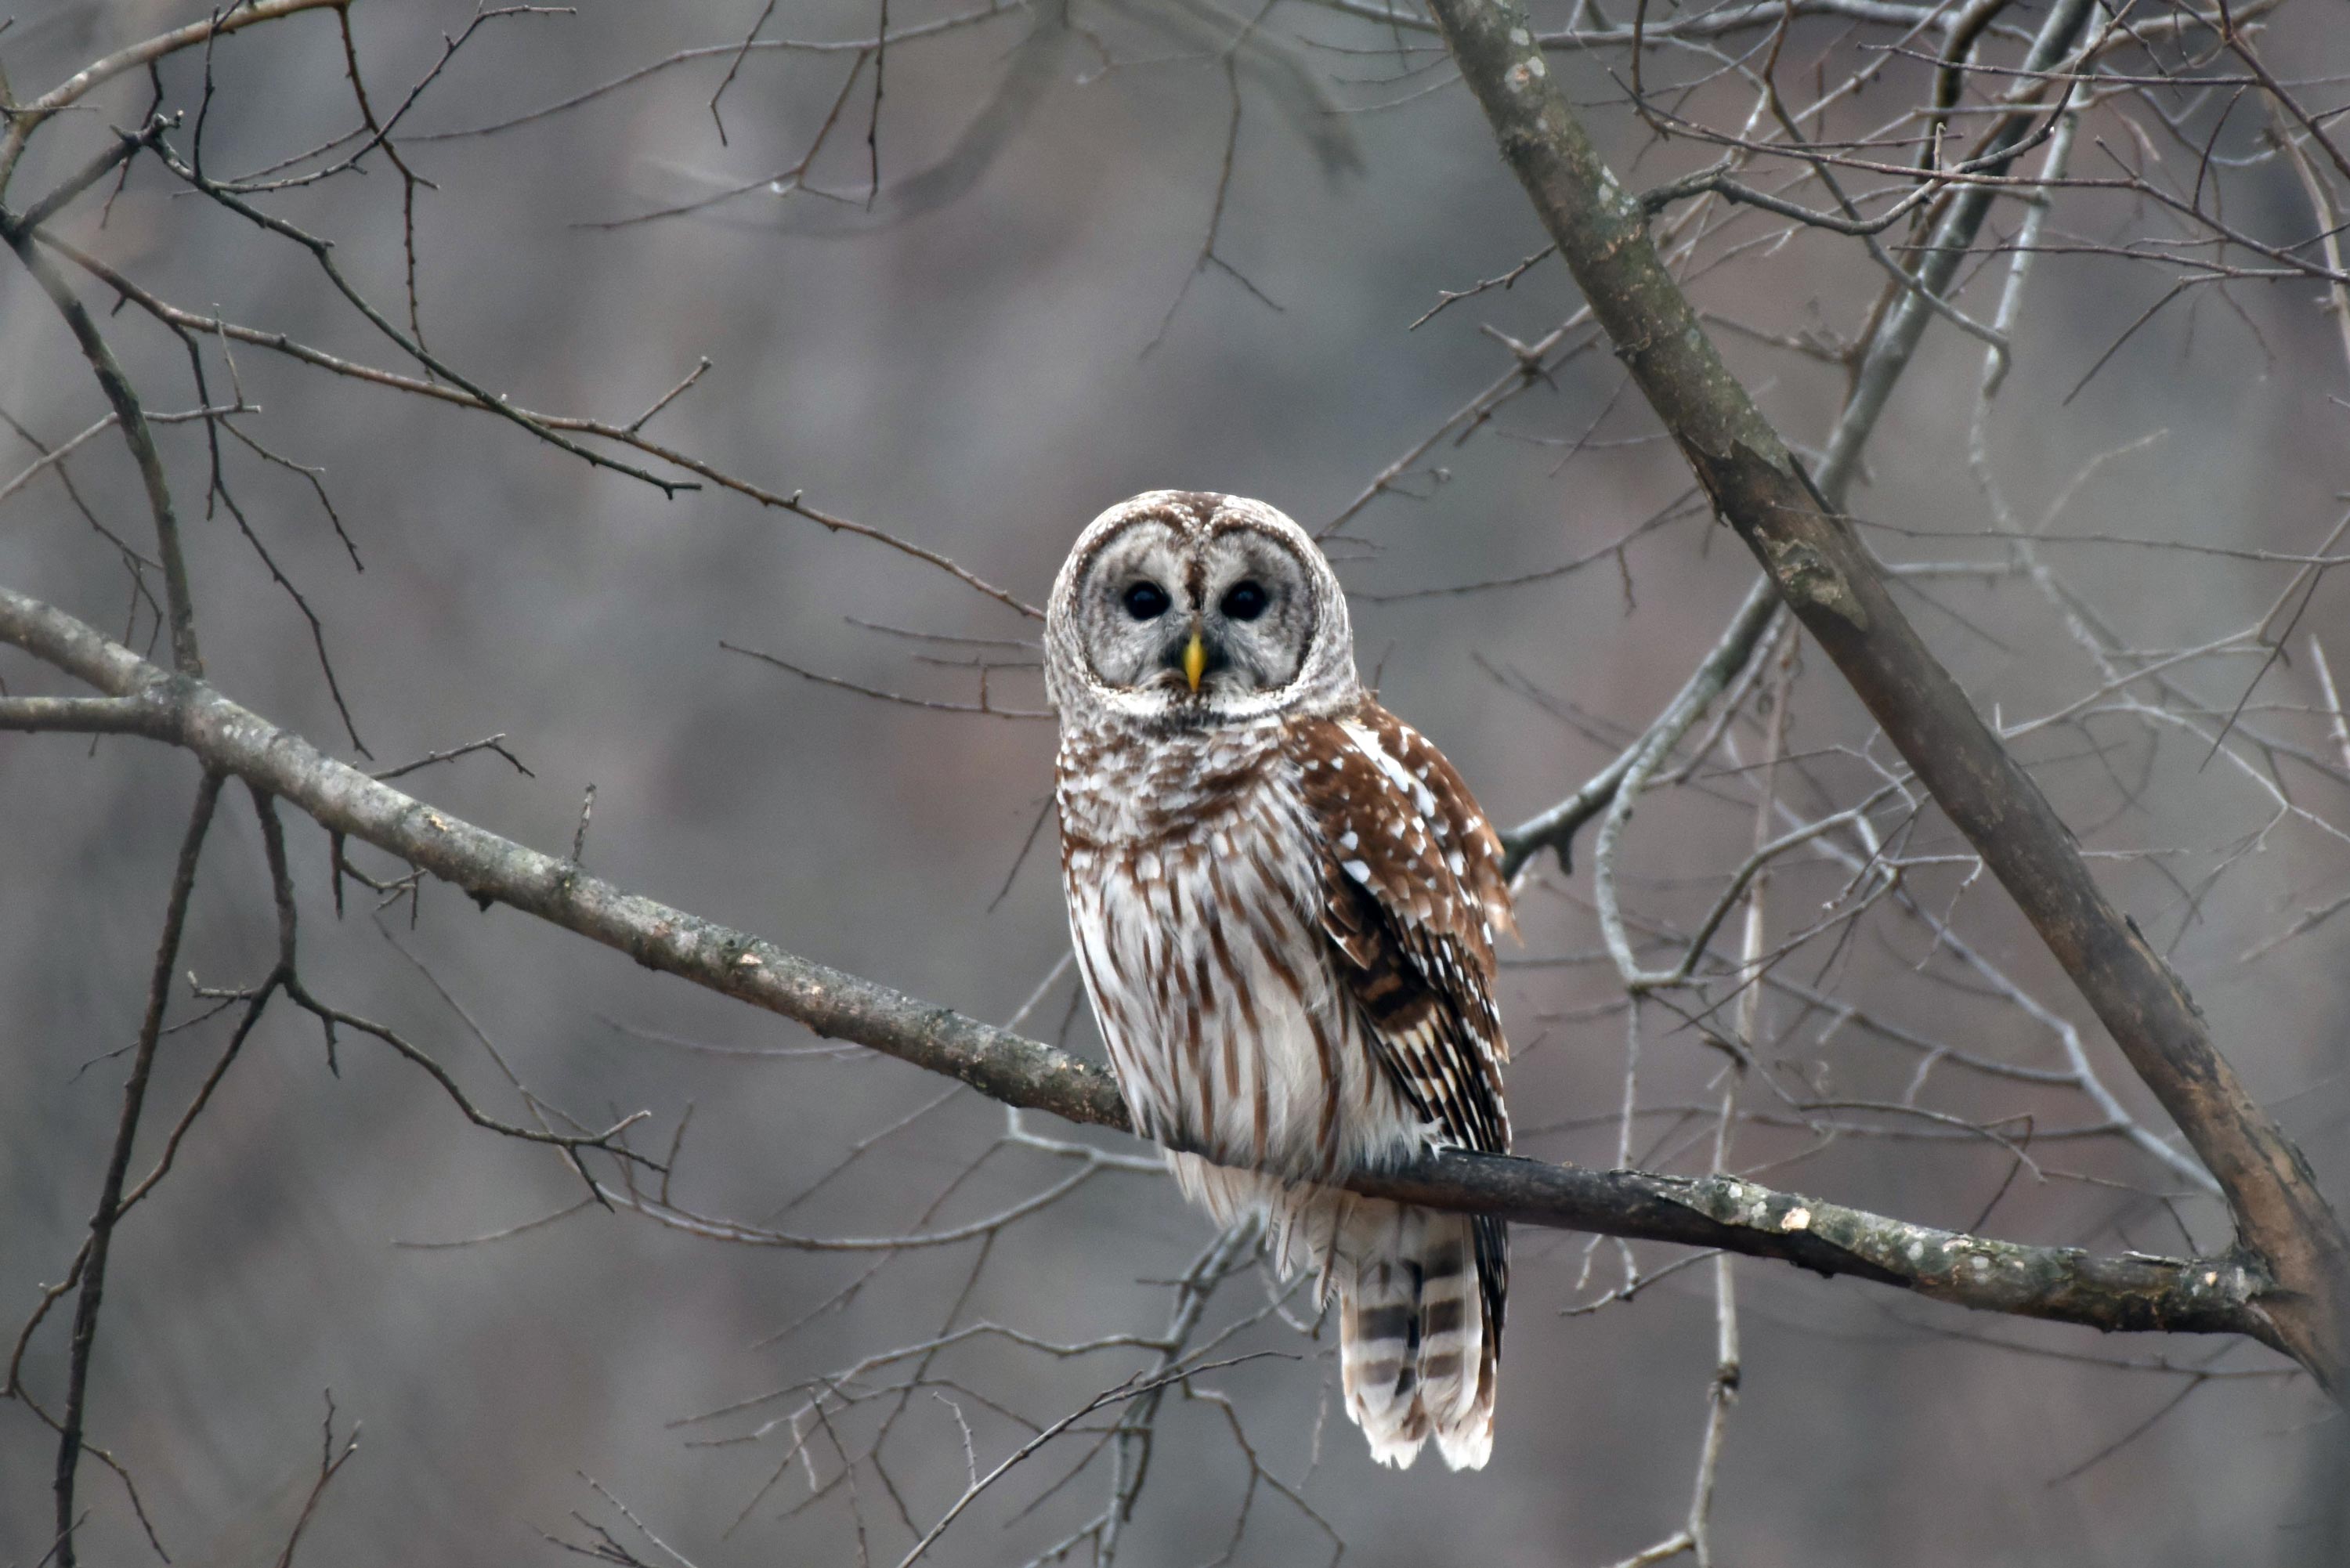 A barred owl on a branch.